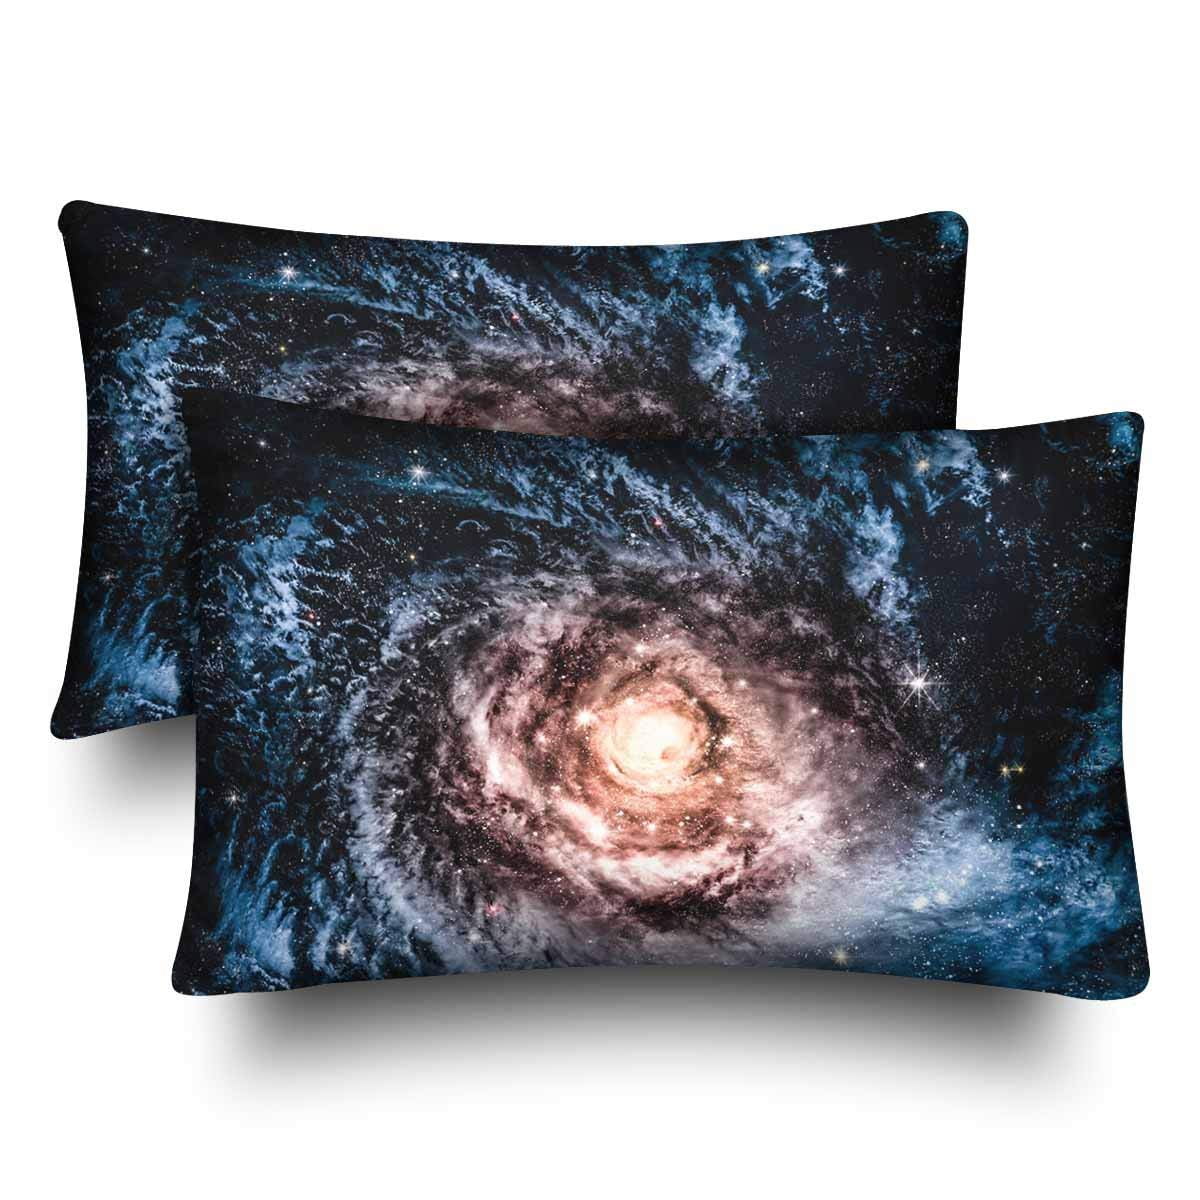 Gckg Awesome Spiral Galaxy Earth Pillow Cases Pillowcase